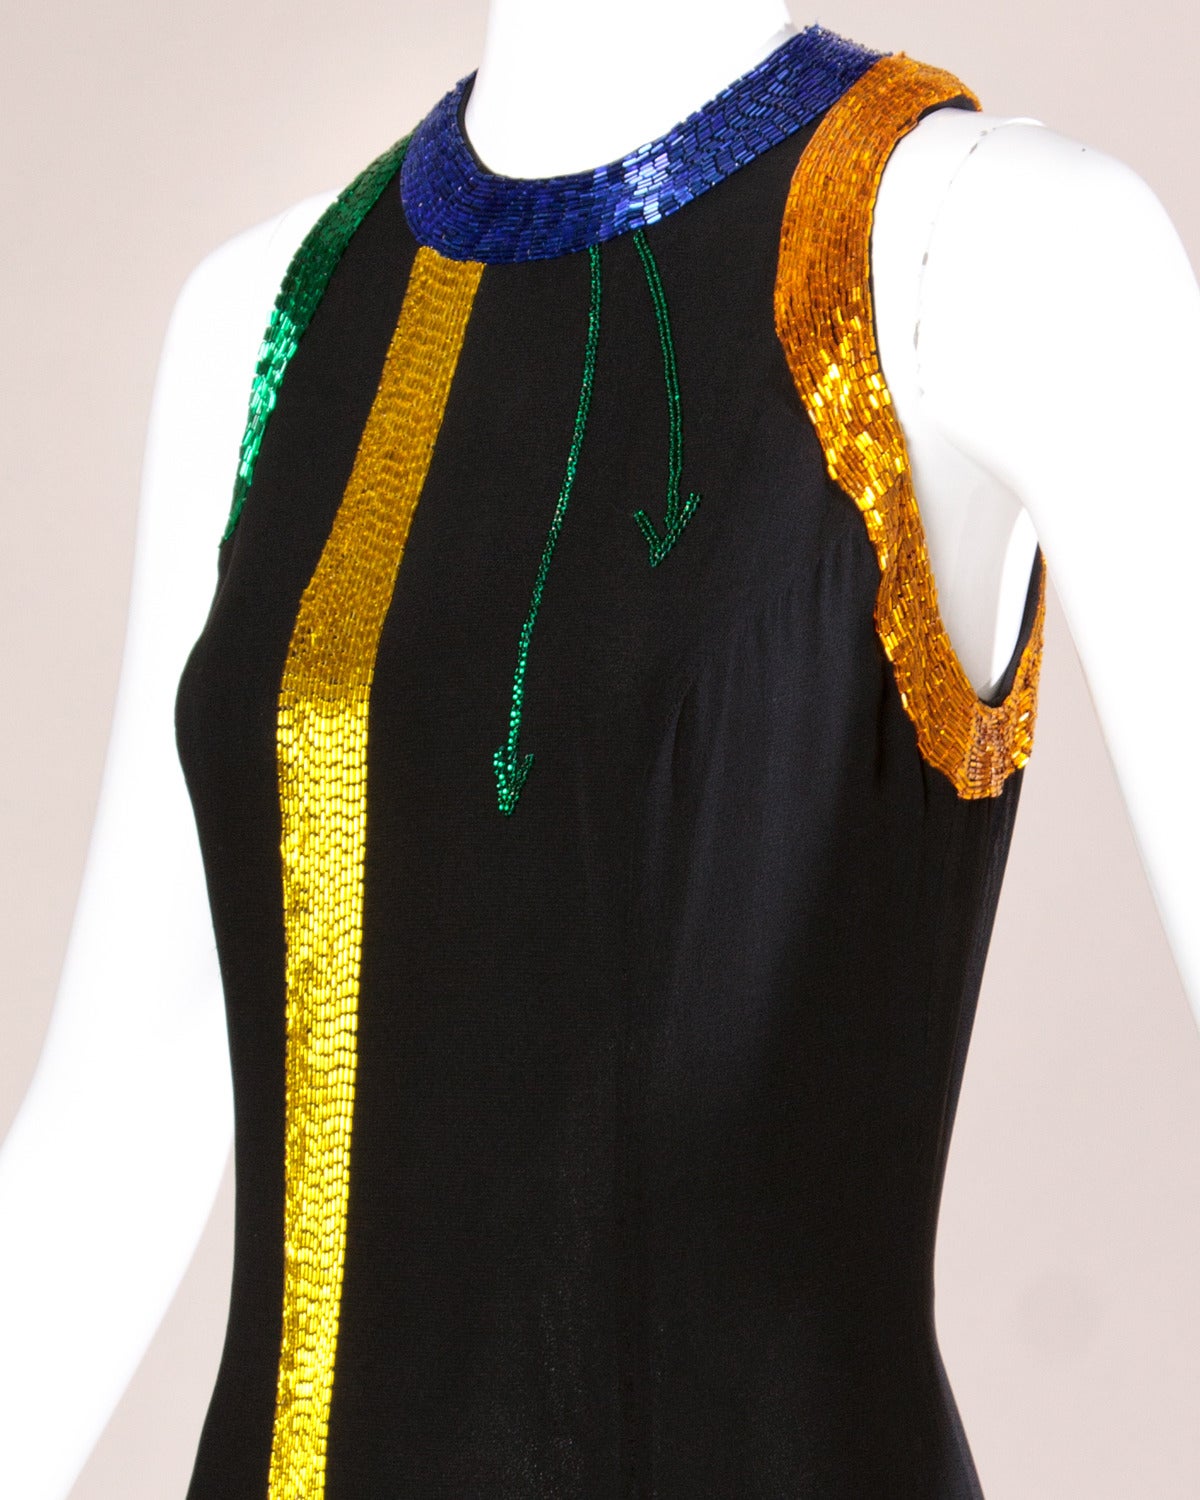 Vintage black silk gown by New York designer Fabrice with brightly colored abstract beadwork in yellow, green, red and blue. Back slit and sleeveless sleeves.

Details:

Fully Lined
Back Zip Closure
Marked Size: 6
Estimated Size: